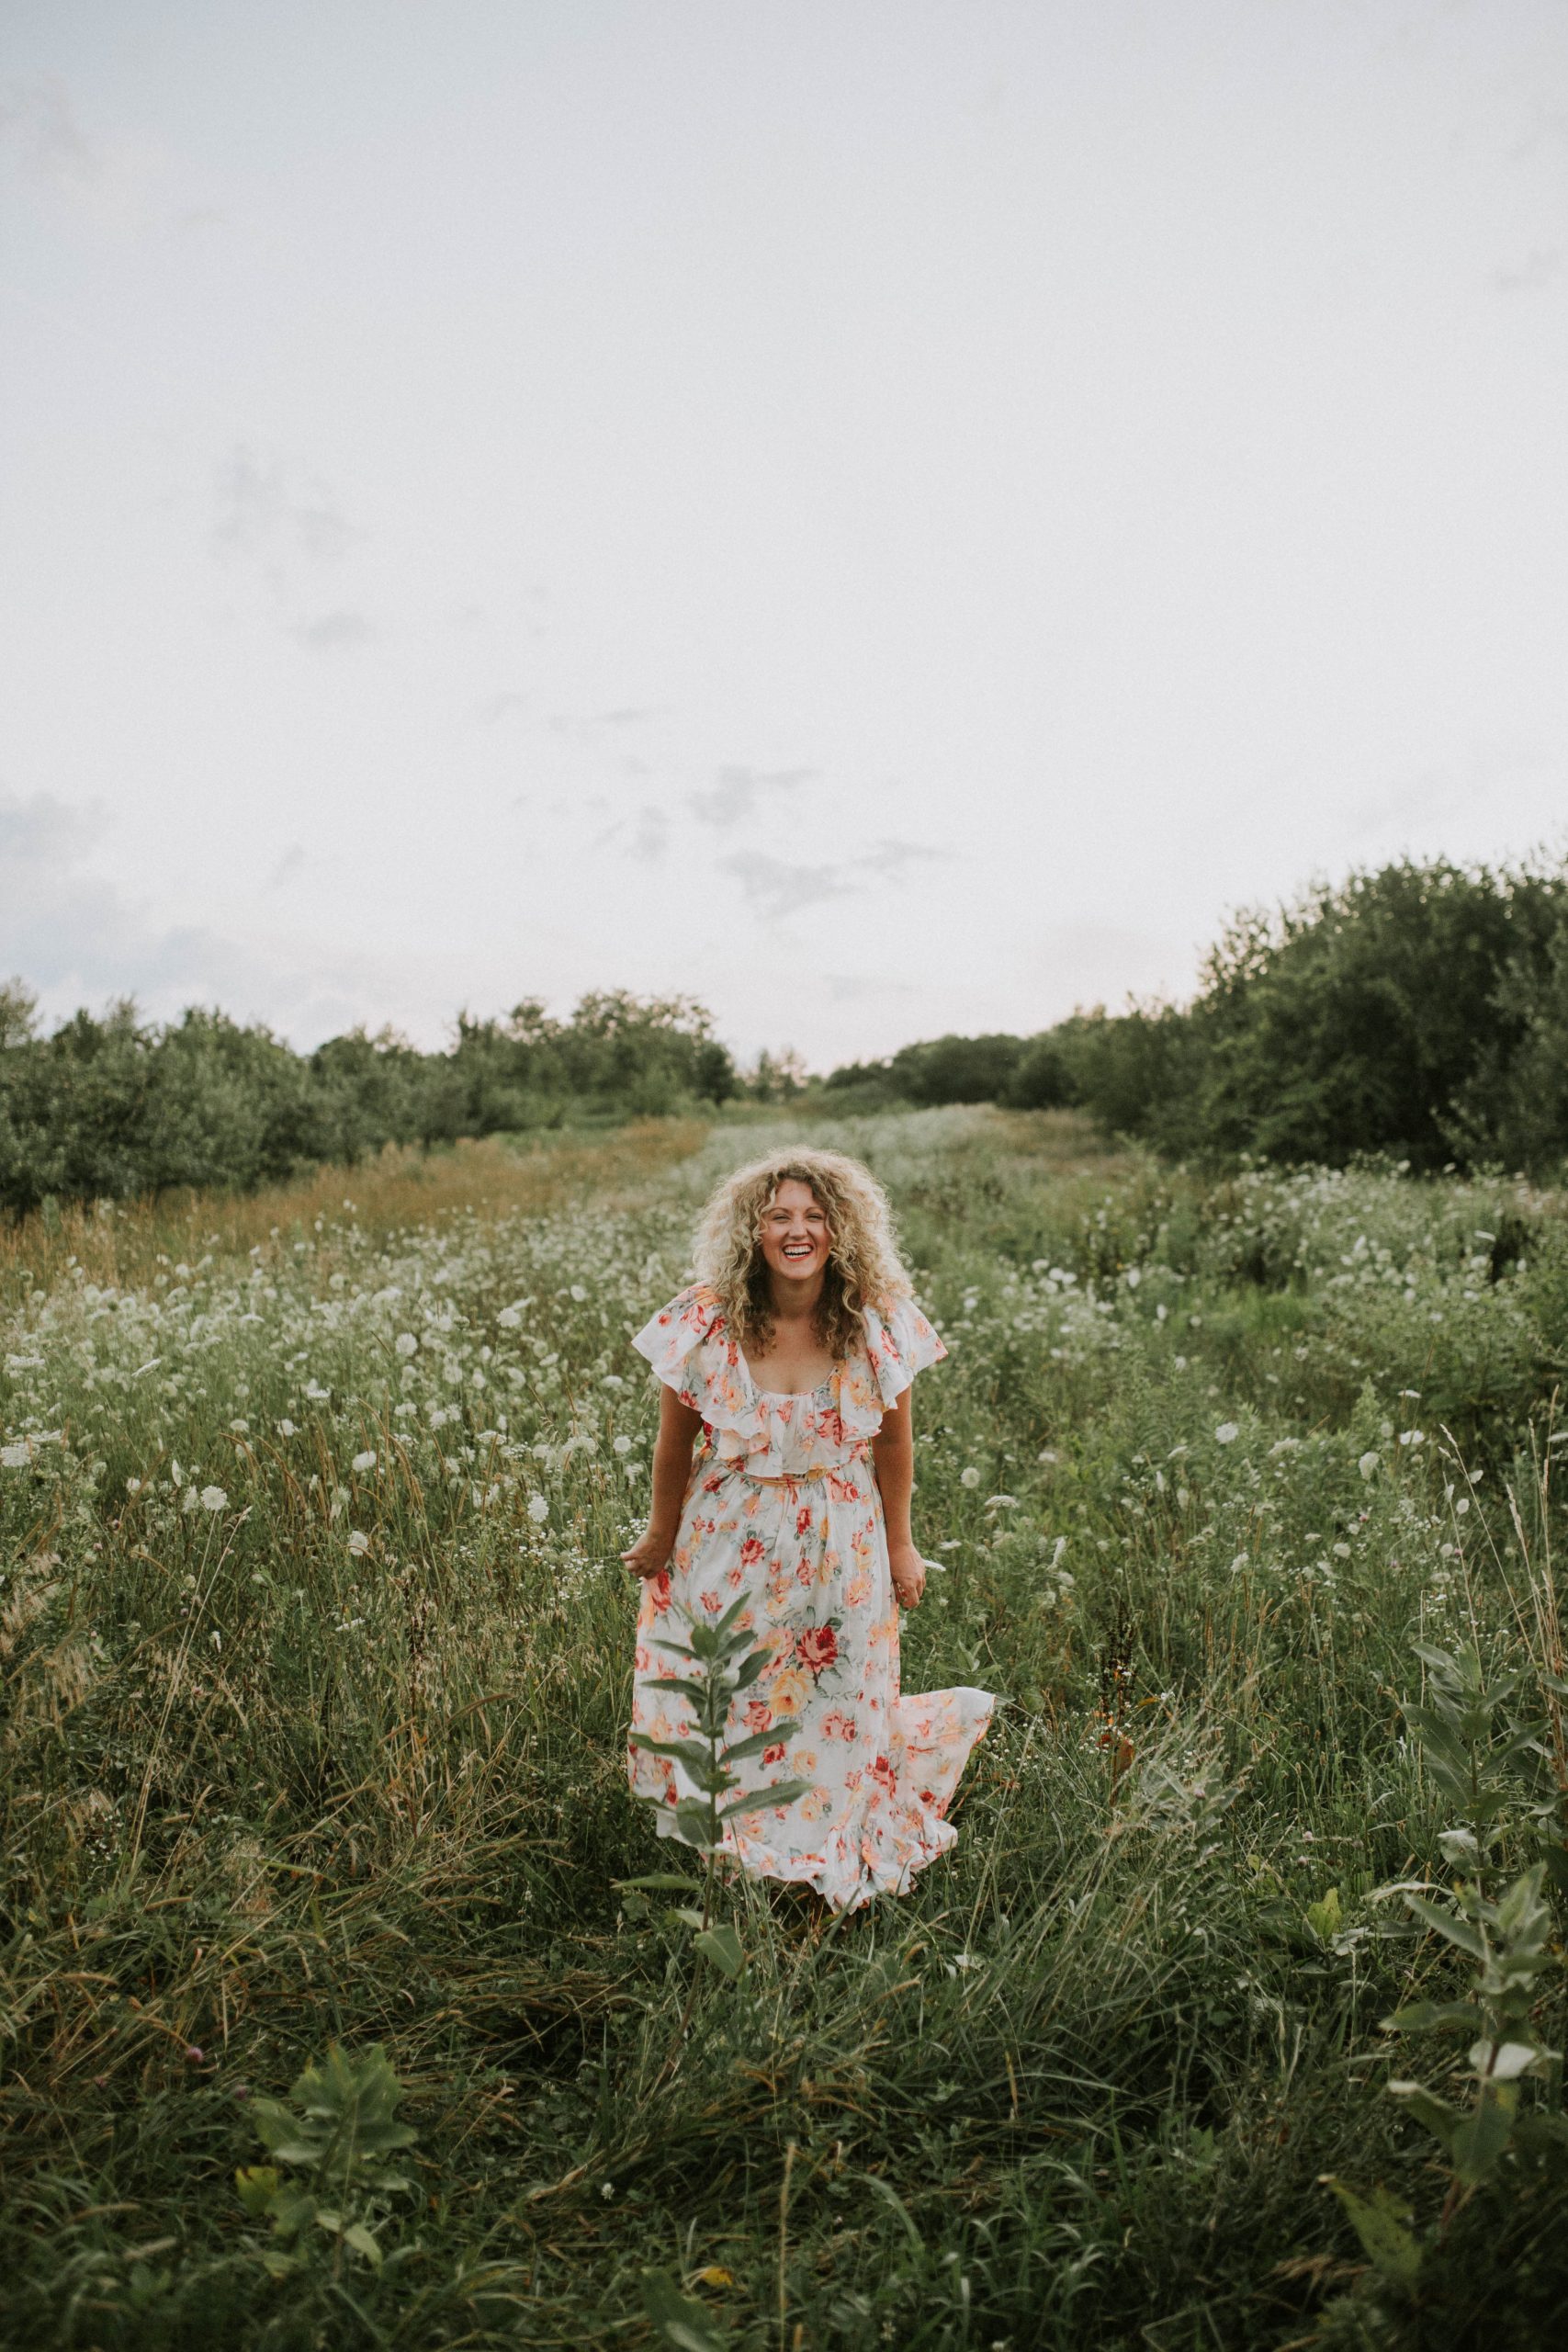 Floral Dress in a Field